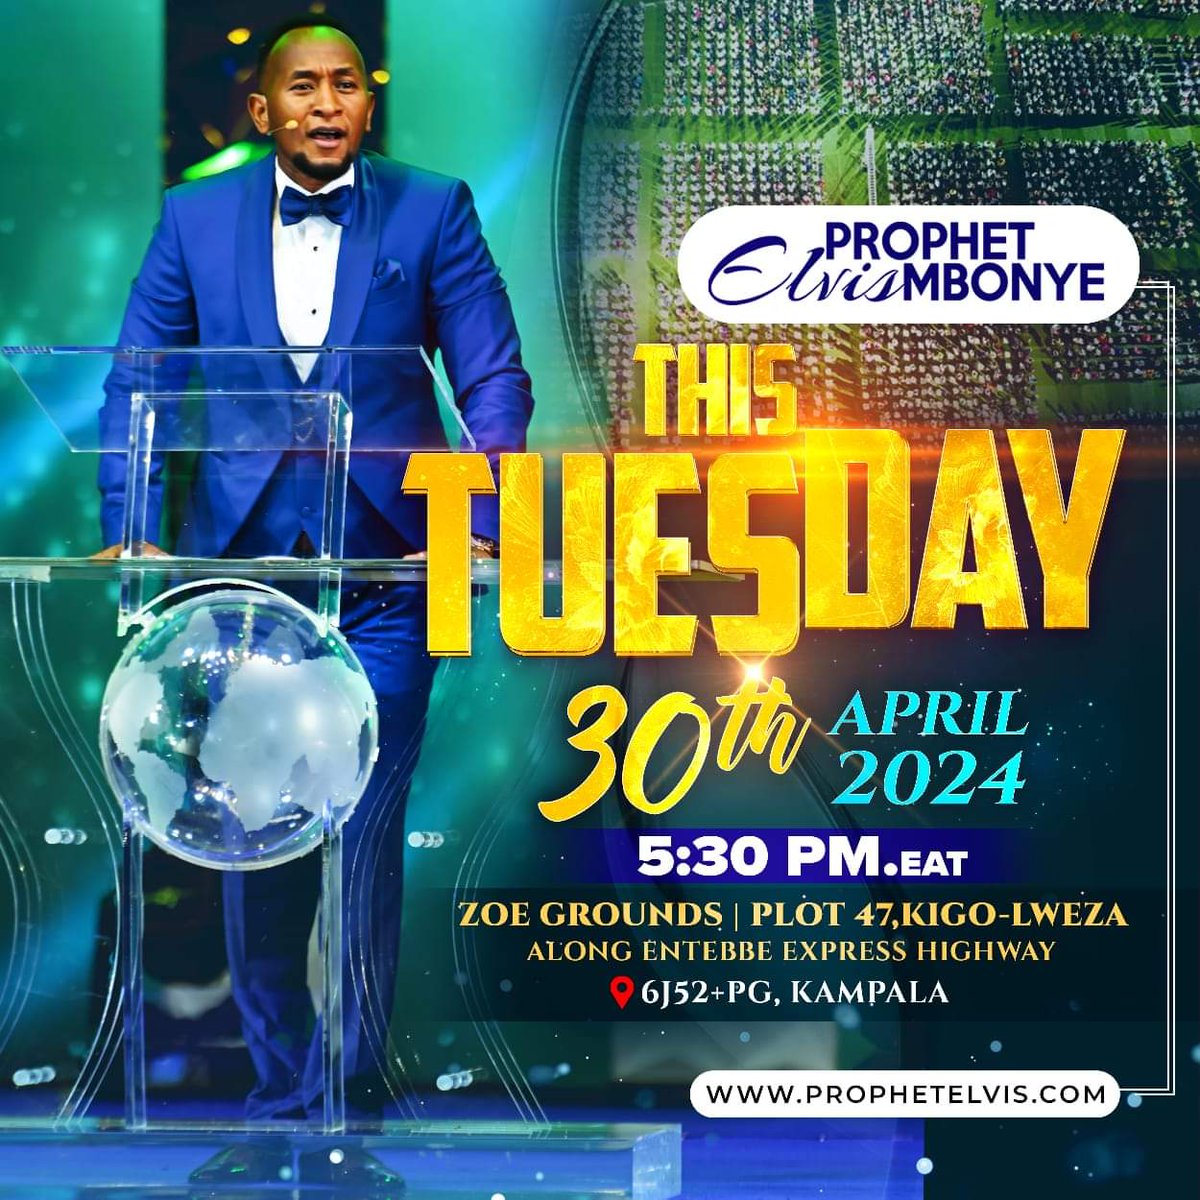 There are people who seem to have it all,many people look up to them and are known as the richest people in the world but the efforts they use to sustain them behind the scenes.But if God gives you something it's for eternity.
@KyambogoGuild 
@nkumba_law 
#ProphetElvisMbonye